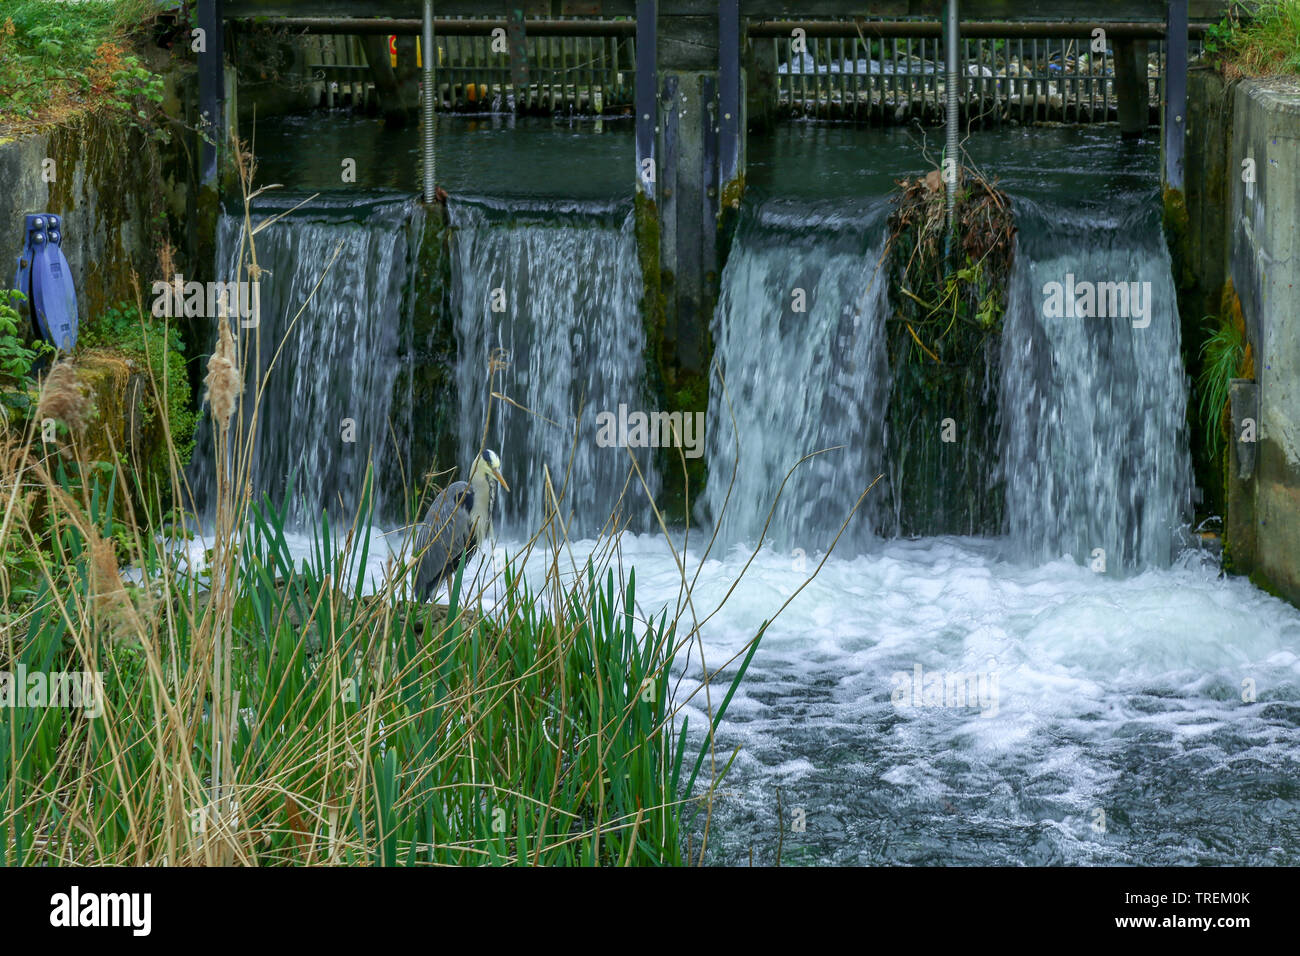 Water cascading over the canal lock gates with heron bird at Woodberry Down reservoir. Stoke Newington, London Stock Photo